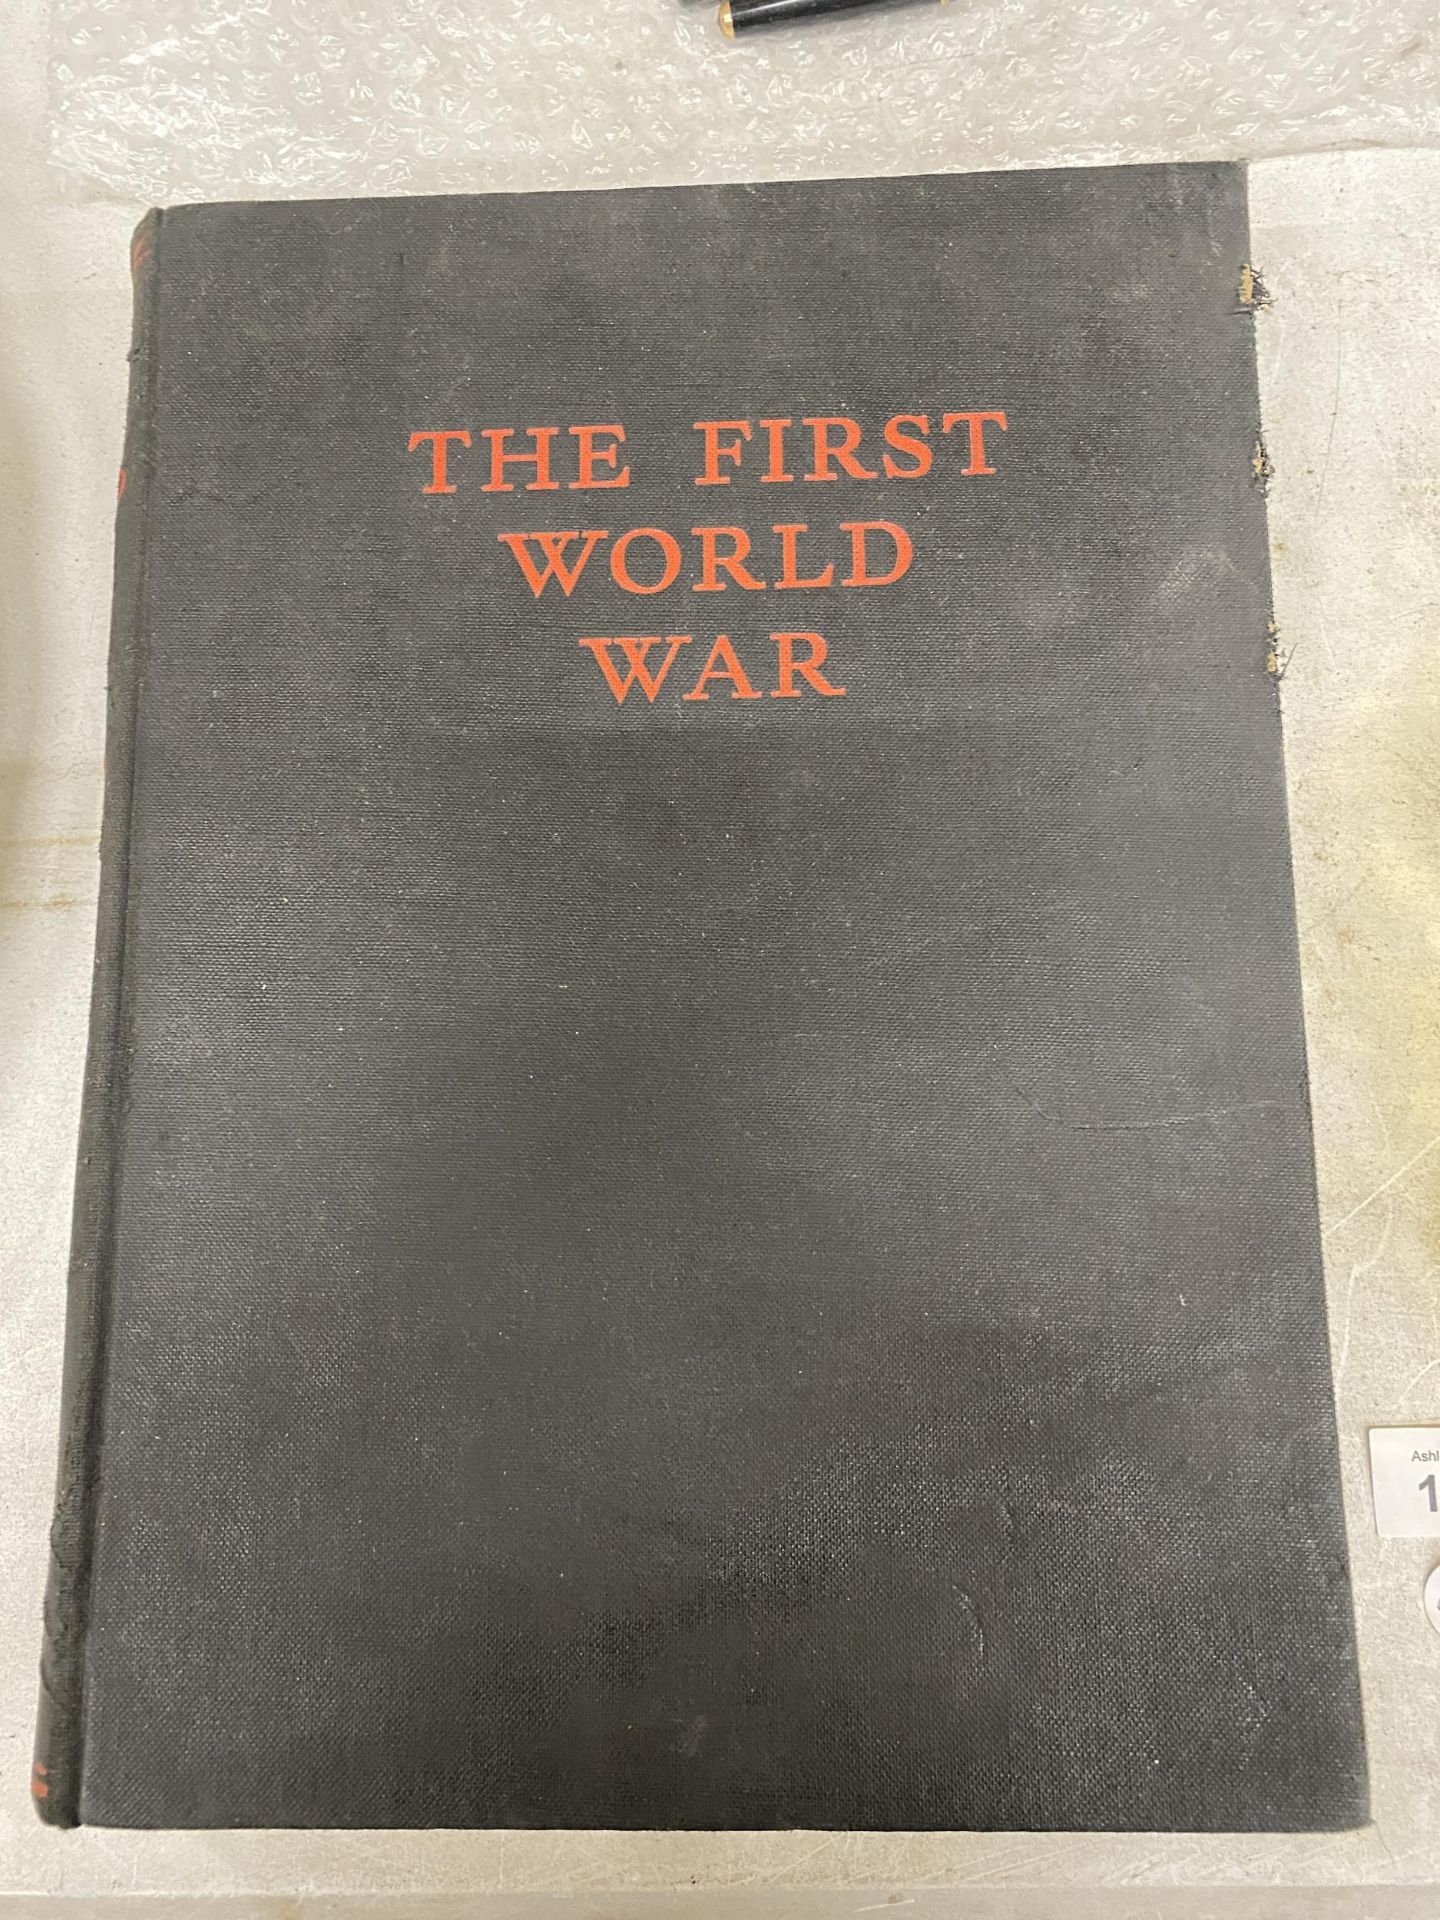 A VINTAGE 'THE FIRST WORLD WAR' BOOK, FIRST PUBLISHED IN 1933